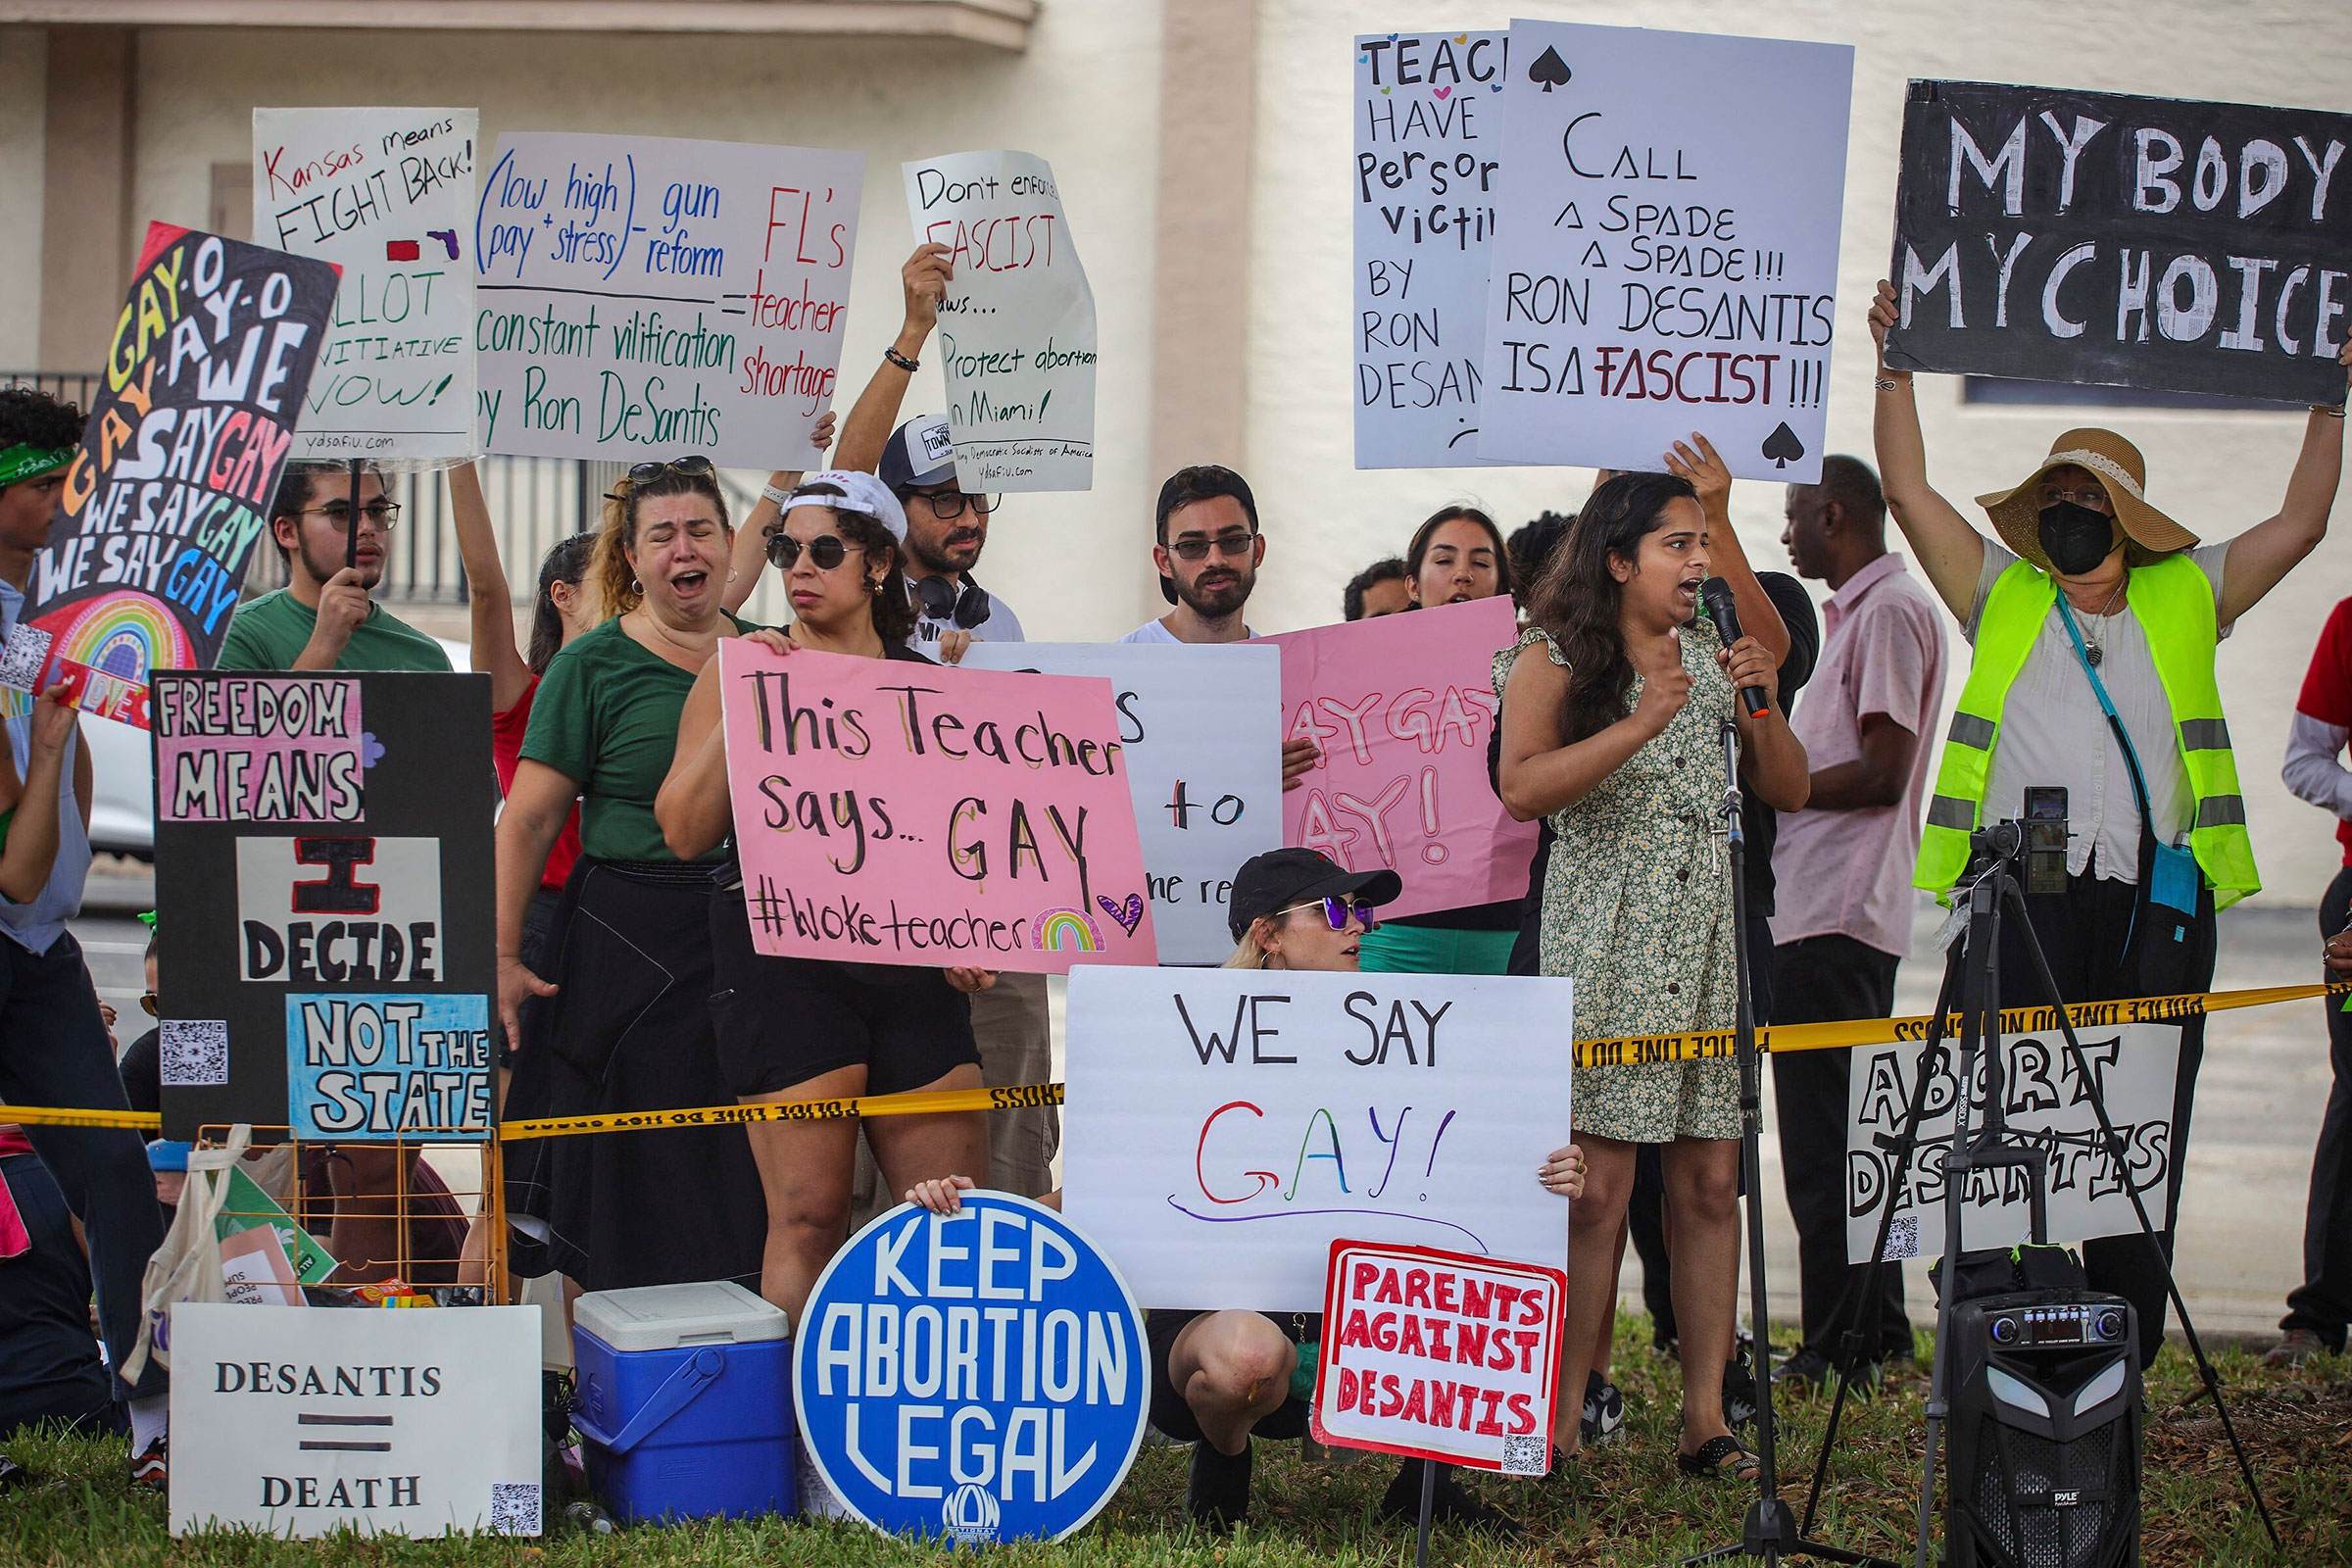 Protestors gather outside the Metro-Dade Firefighters Local 1403 at an event for conservative school board candidates in Doral, Fla. on Aug. 21 2022. The enforcement of Florida's HB 1557—which critics have dubbed the 